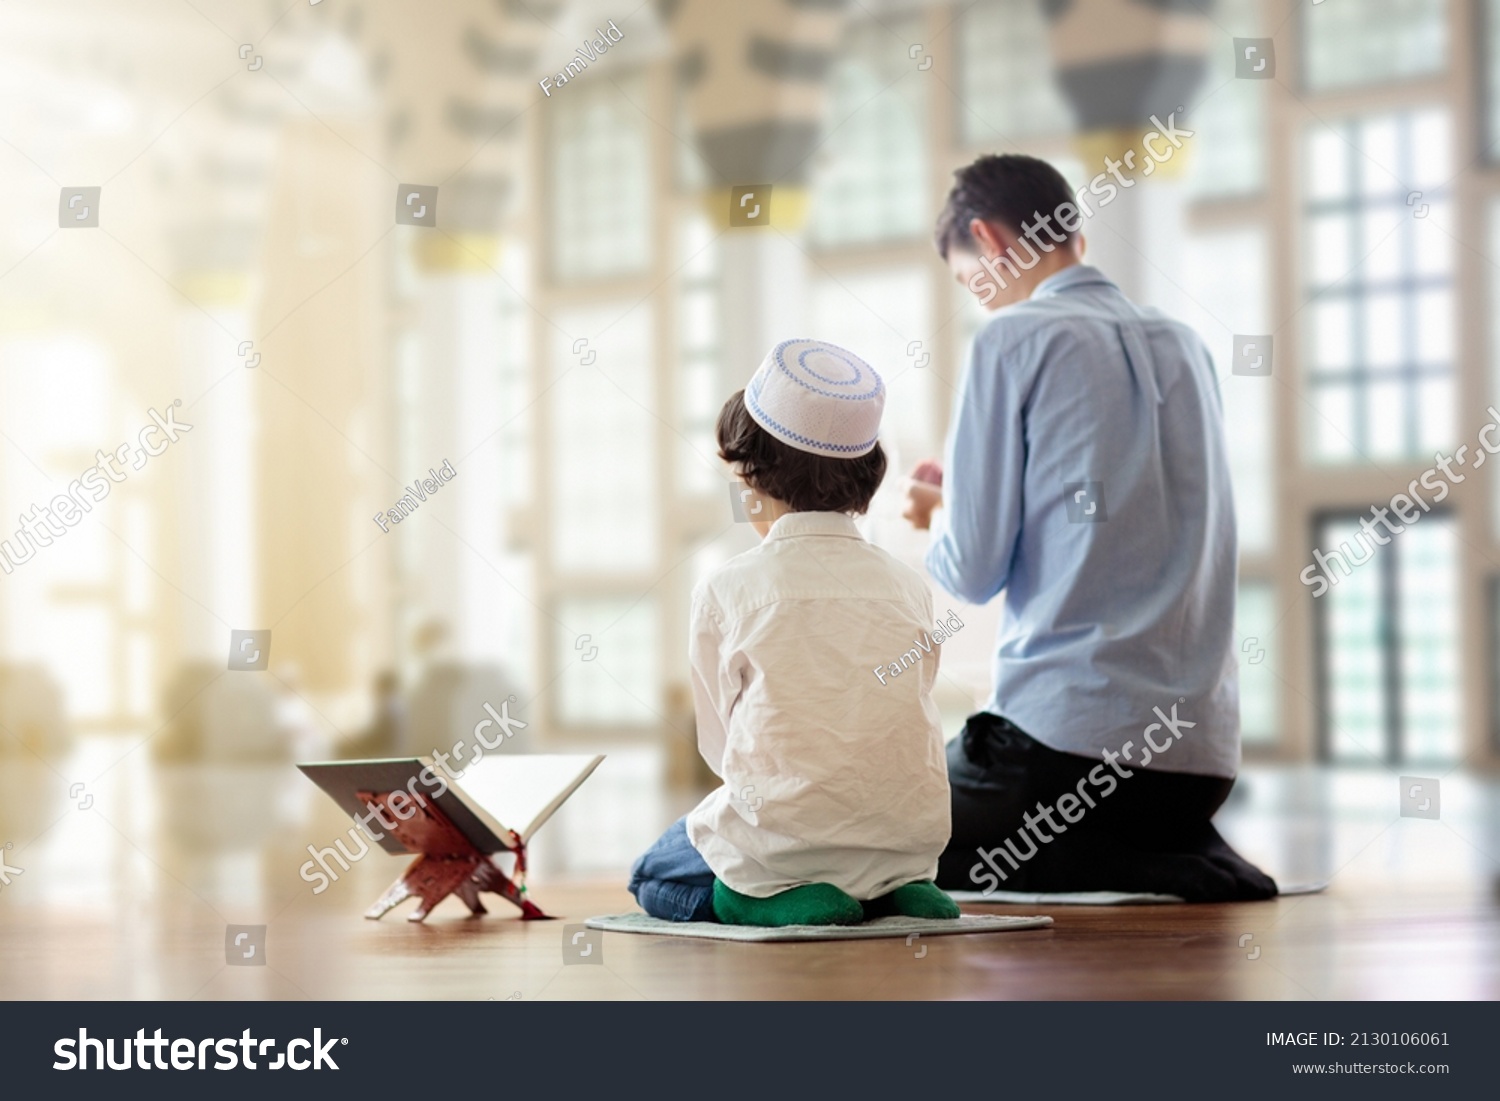 Ramadan Kareem greeting. Father and son in mosque. Muslim family praying. Man and child read Quran and pray. End of fasting. Hari Raya day. Eid al-Fitr celebration. Breaking of holy fast day.  #2130106061